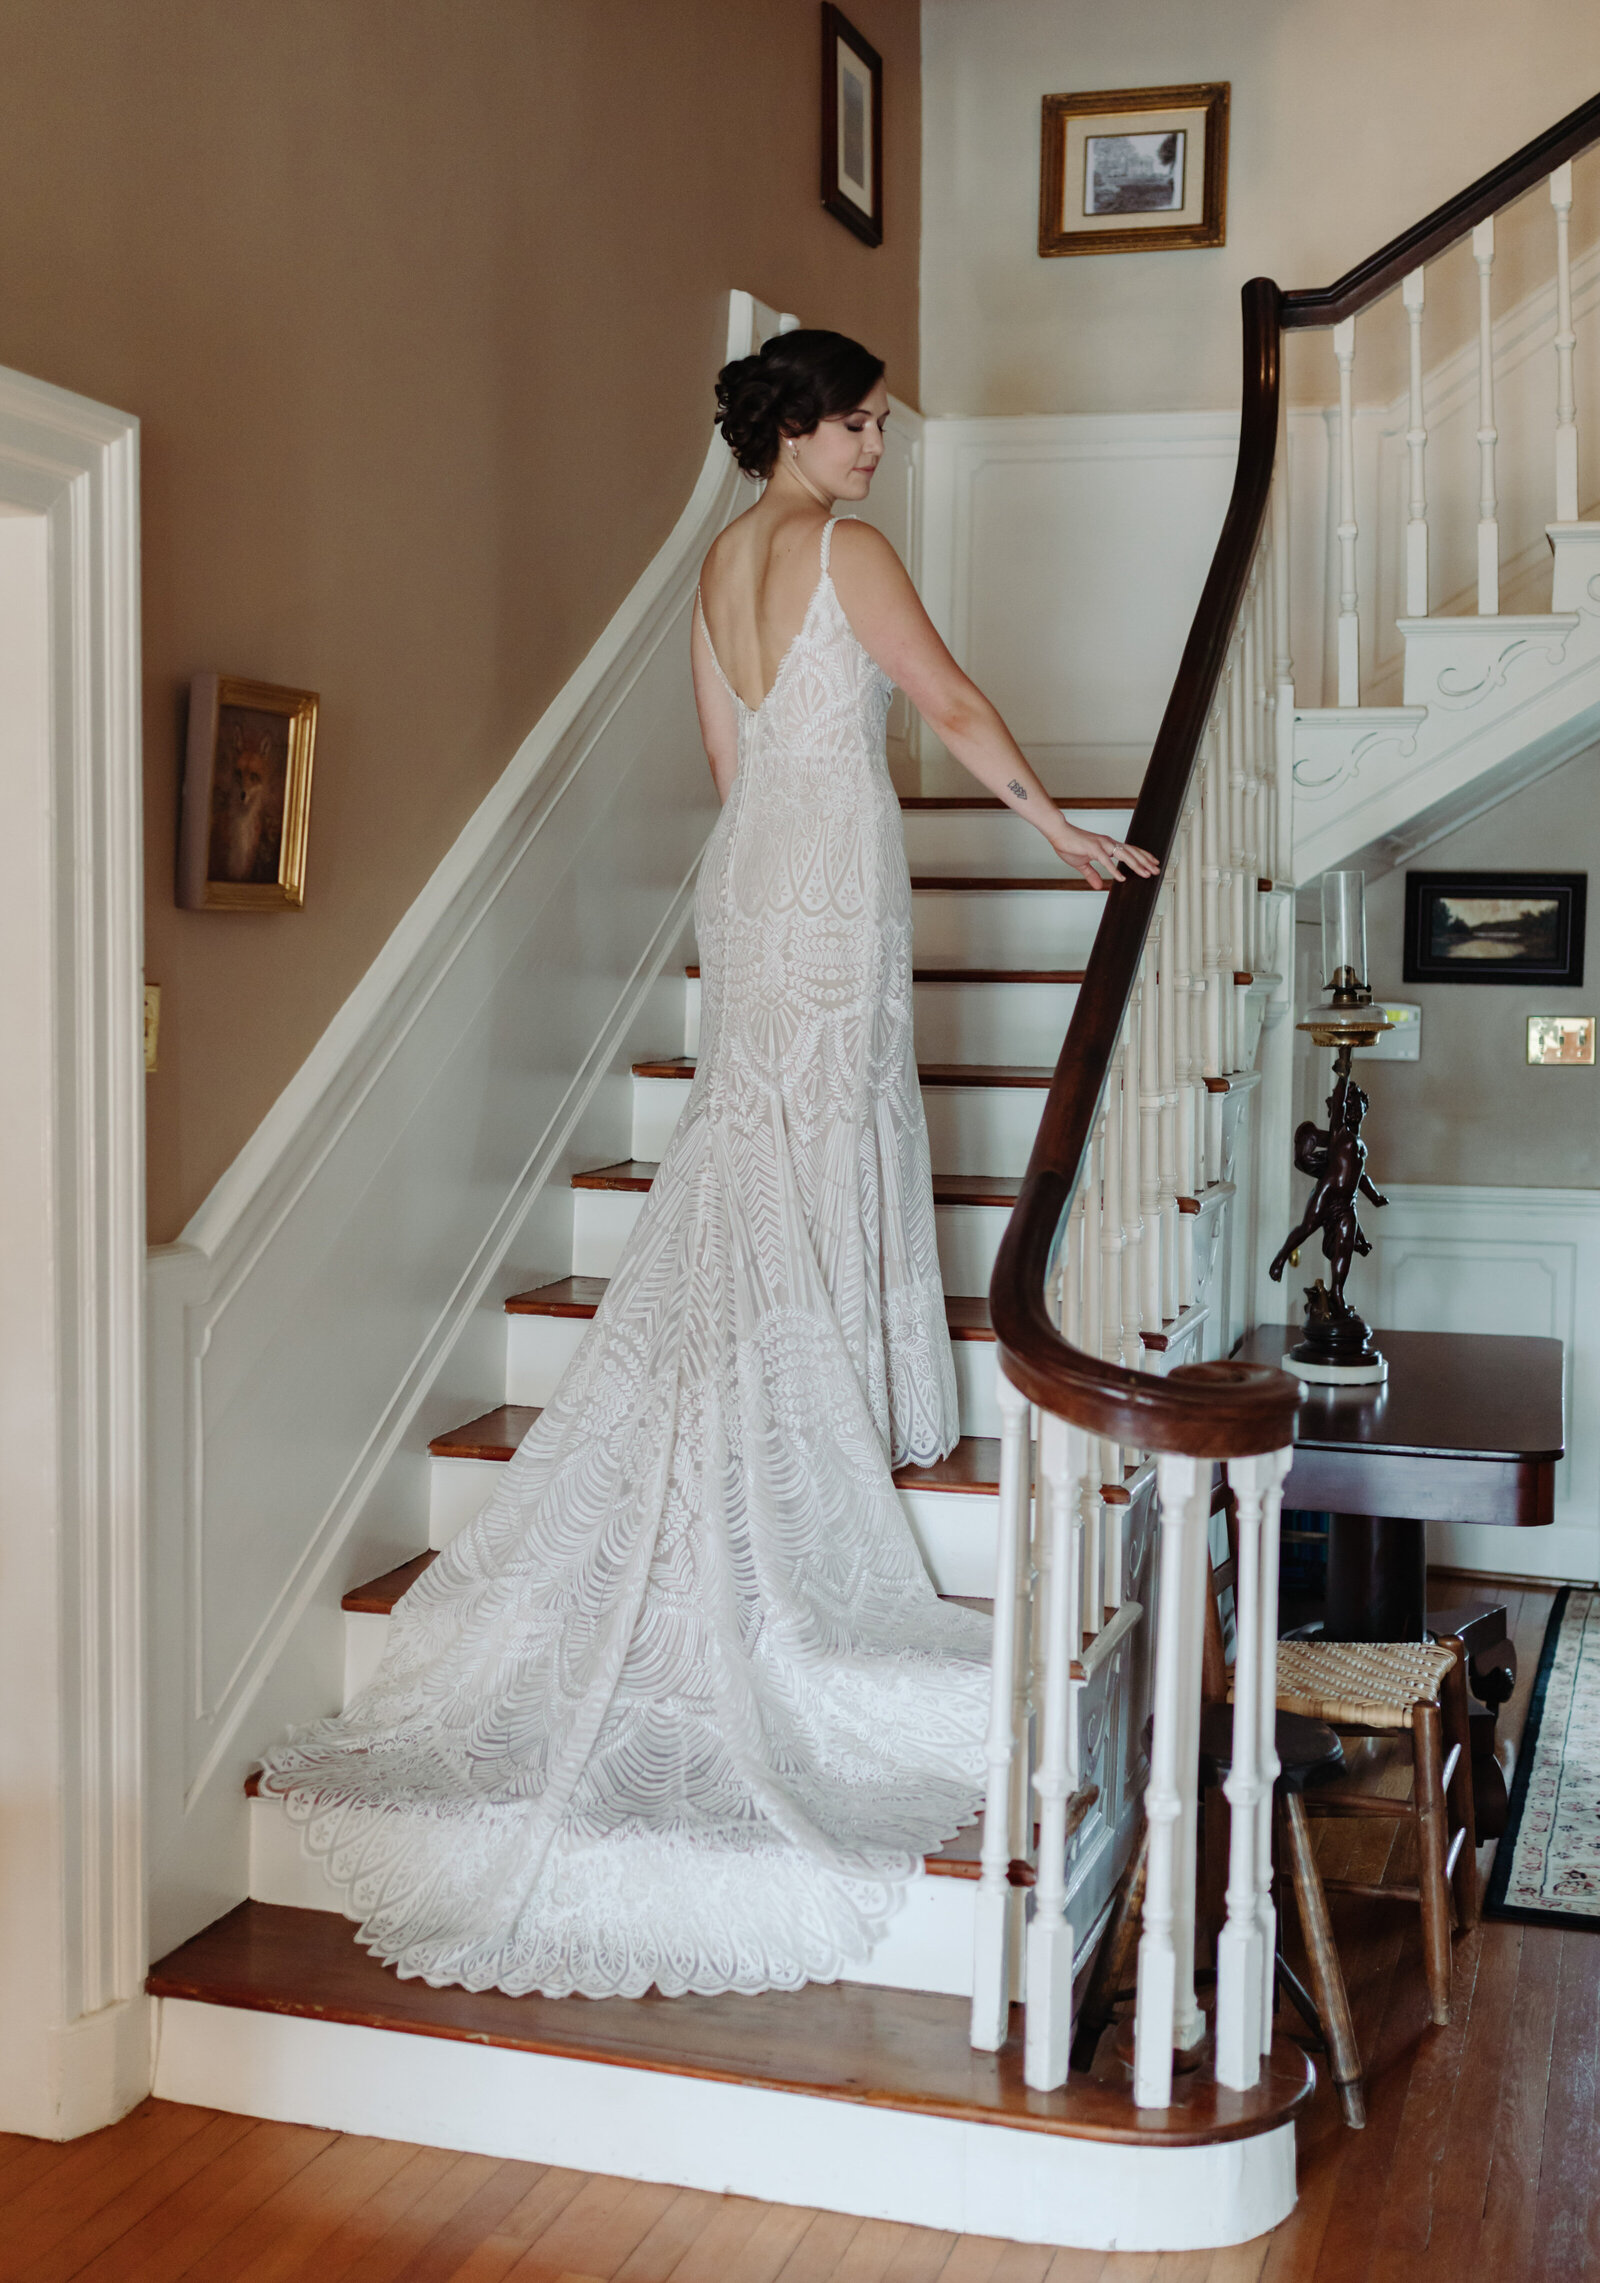 A bride stands on a grand staircase in a vintage wedding dress